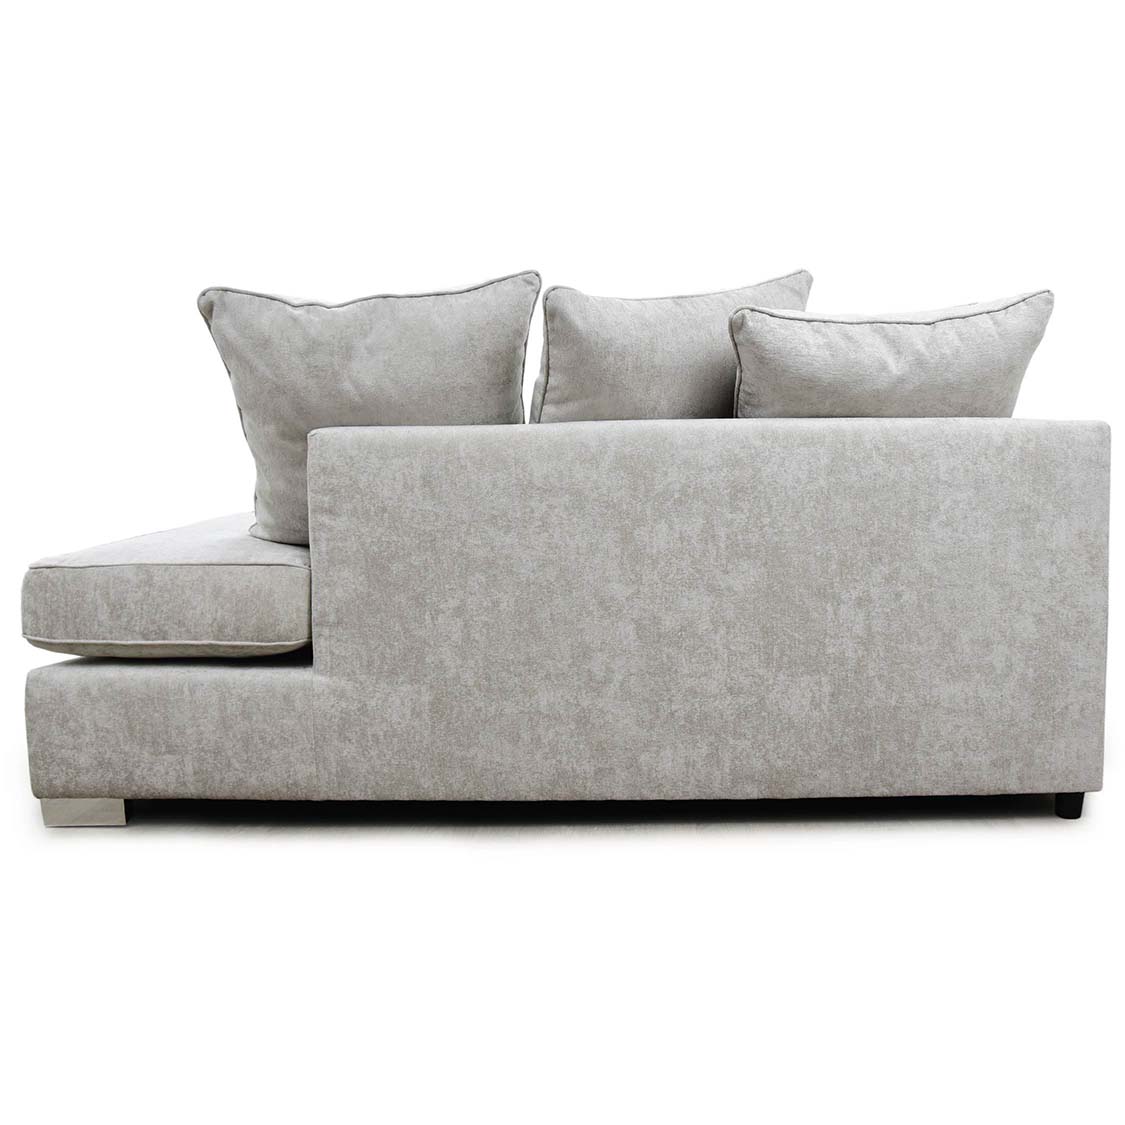 Battersea Sofa with Right Hand Facing Chaise End View of Chaise